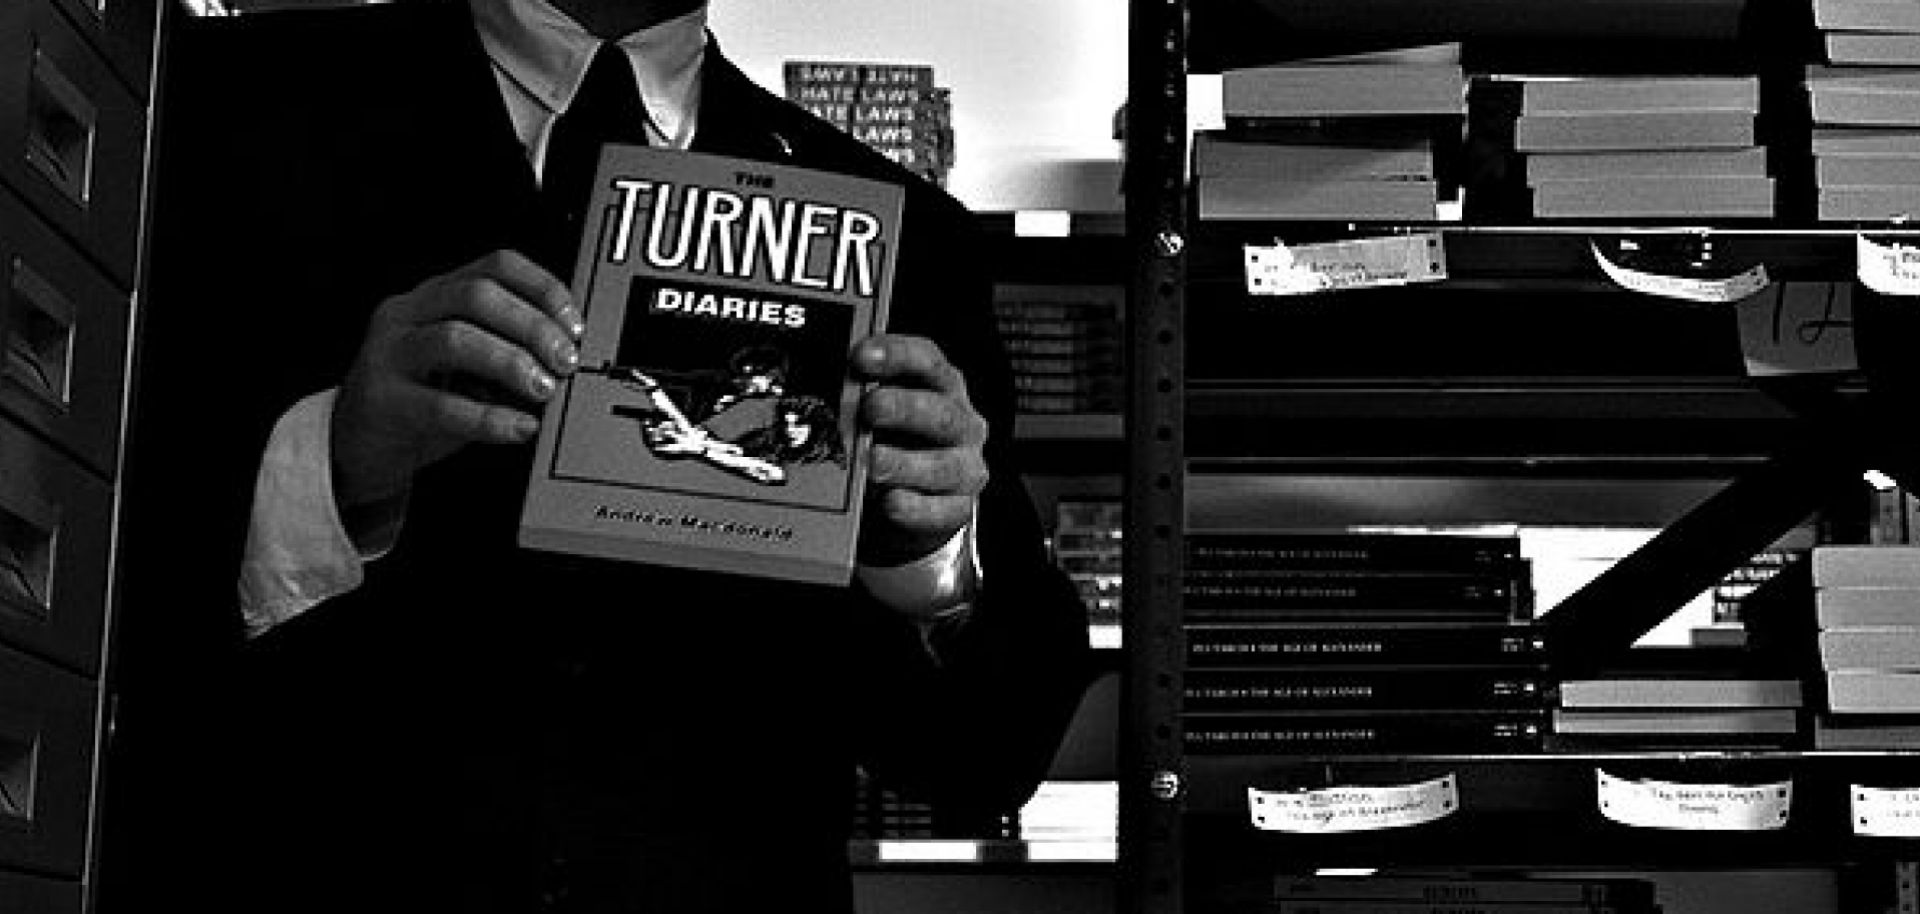 'The Turner Diaries,' by National Alliance leader William Pierce, provides a blueprint for conducting terrorist operations as an underground organization.